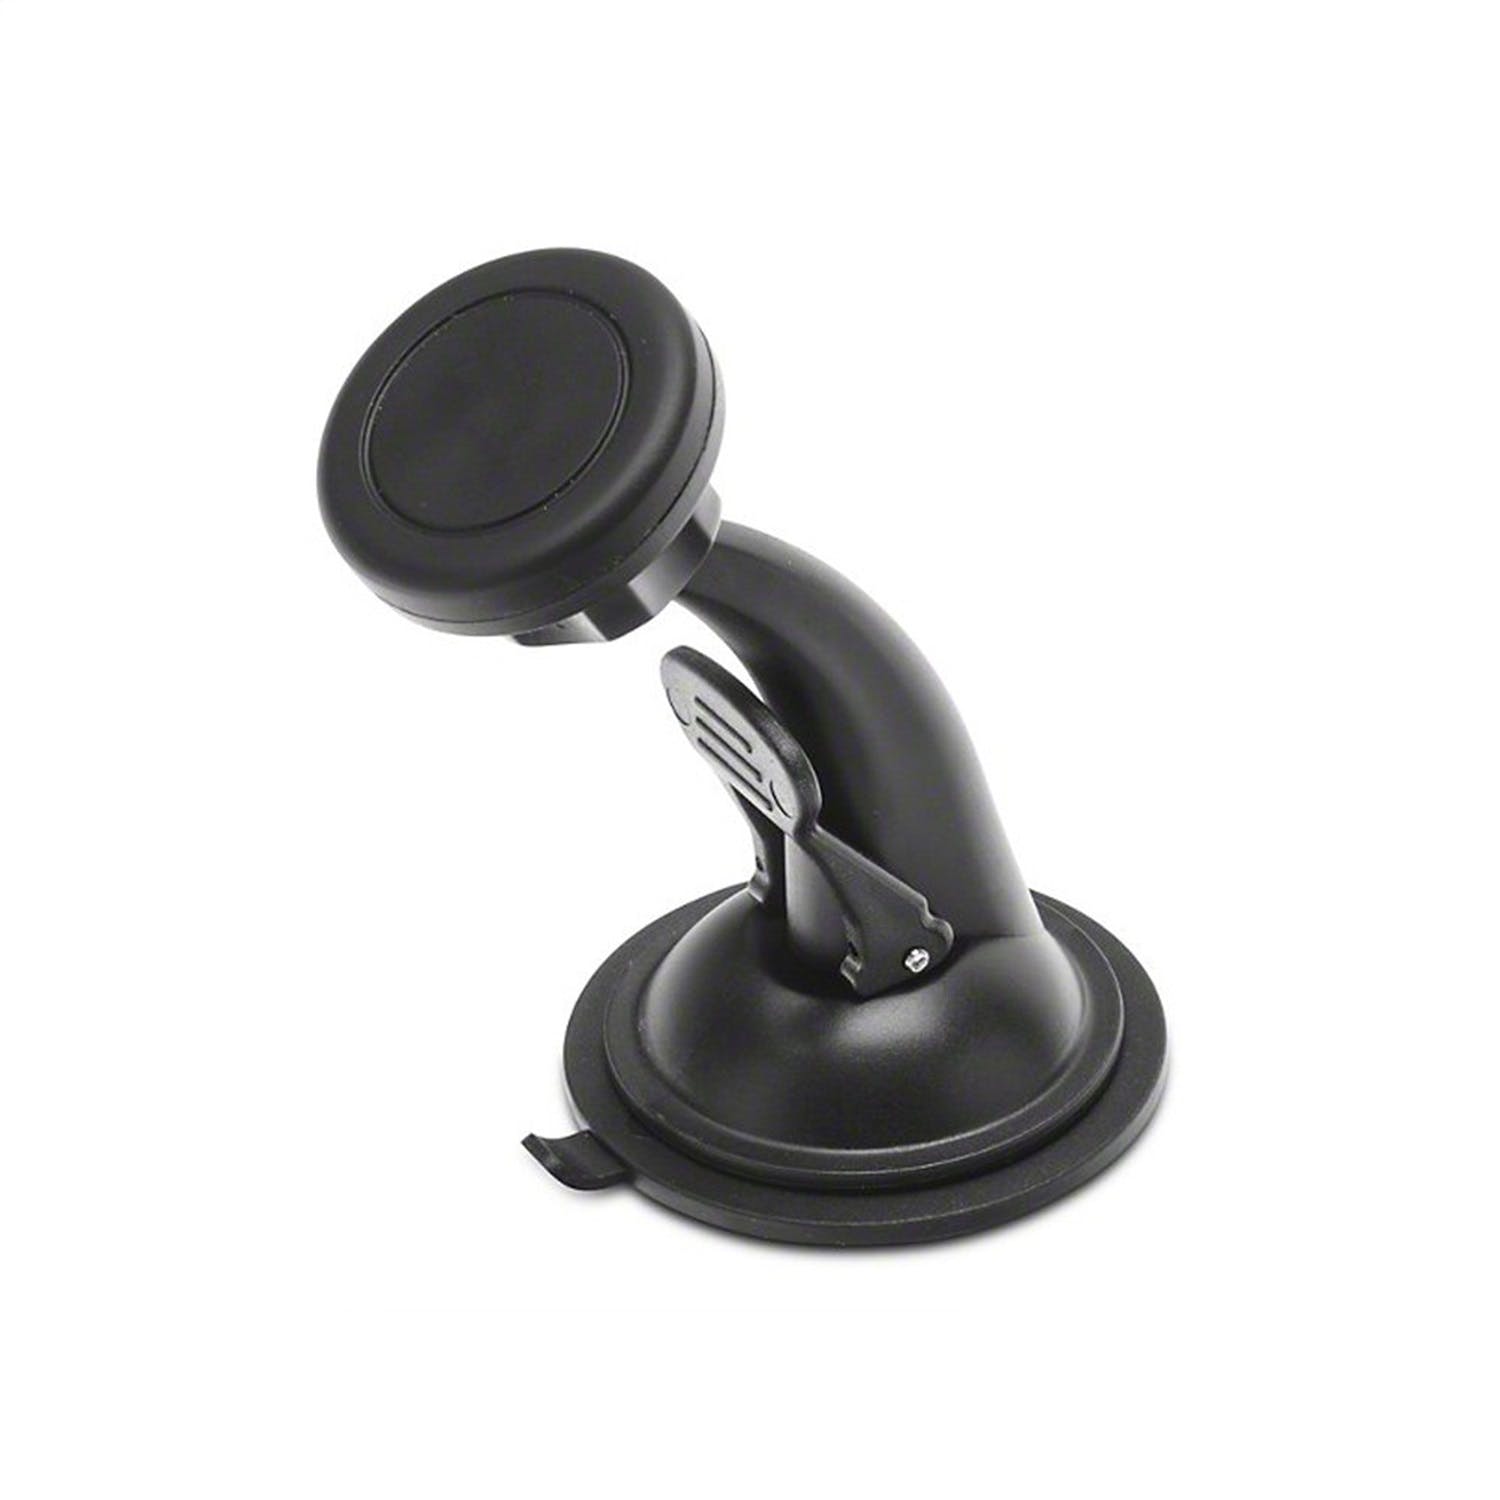 Bully Dog 30490 BDX Magnetic Suction Cup Windshield Mount